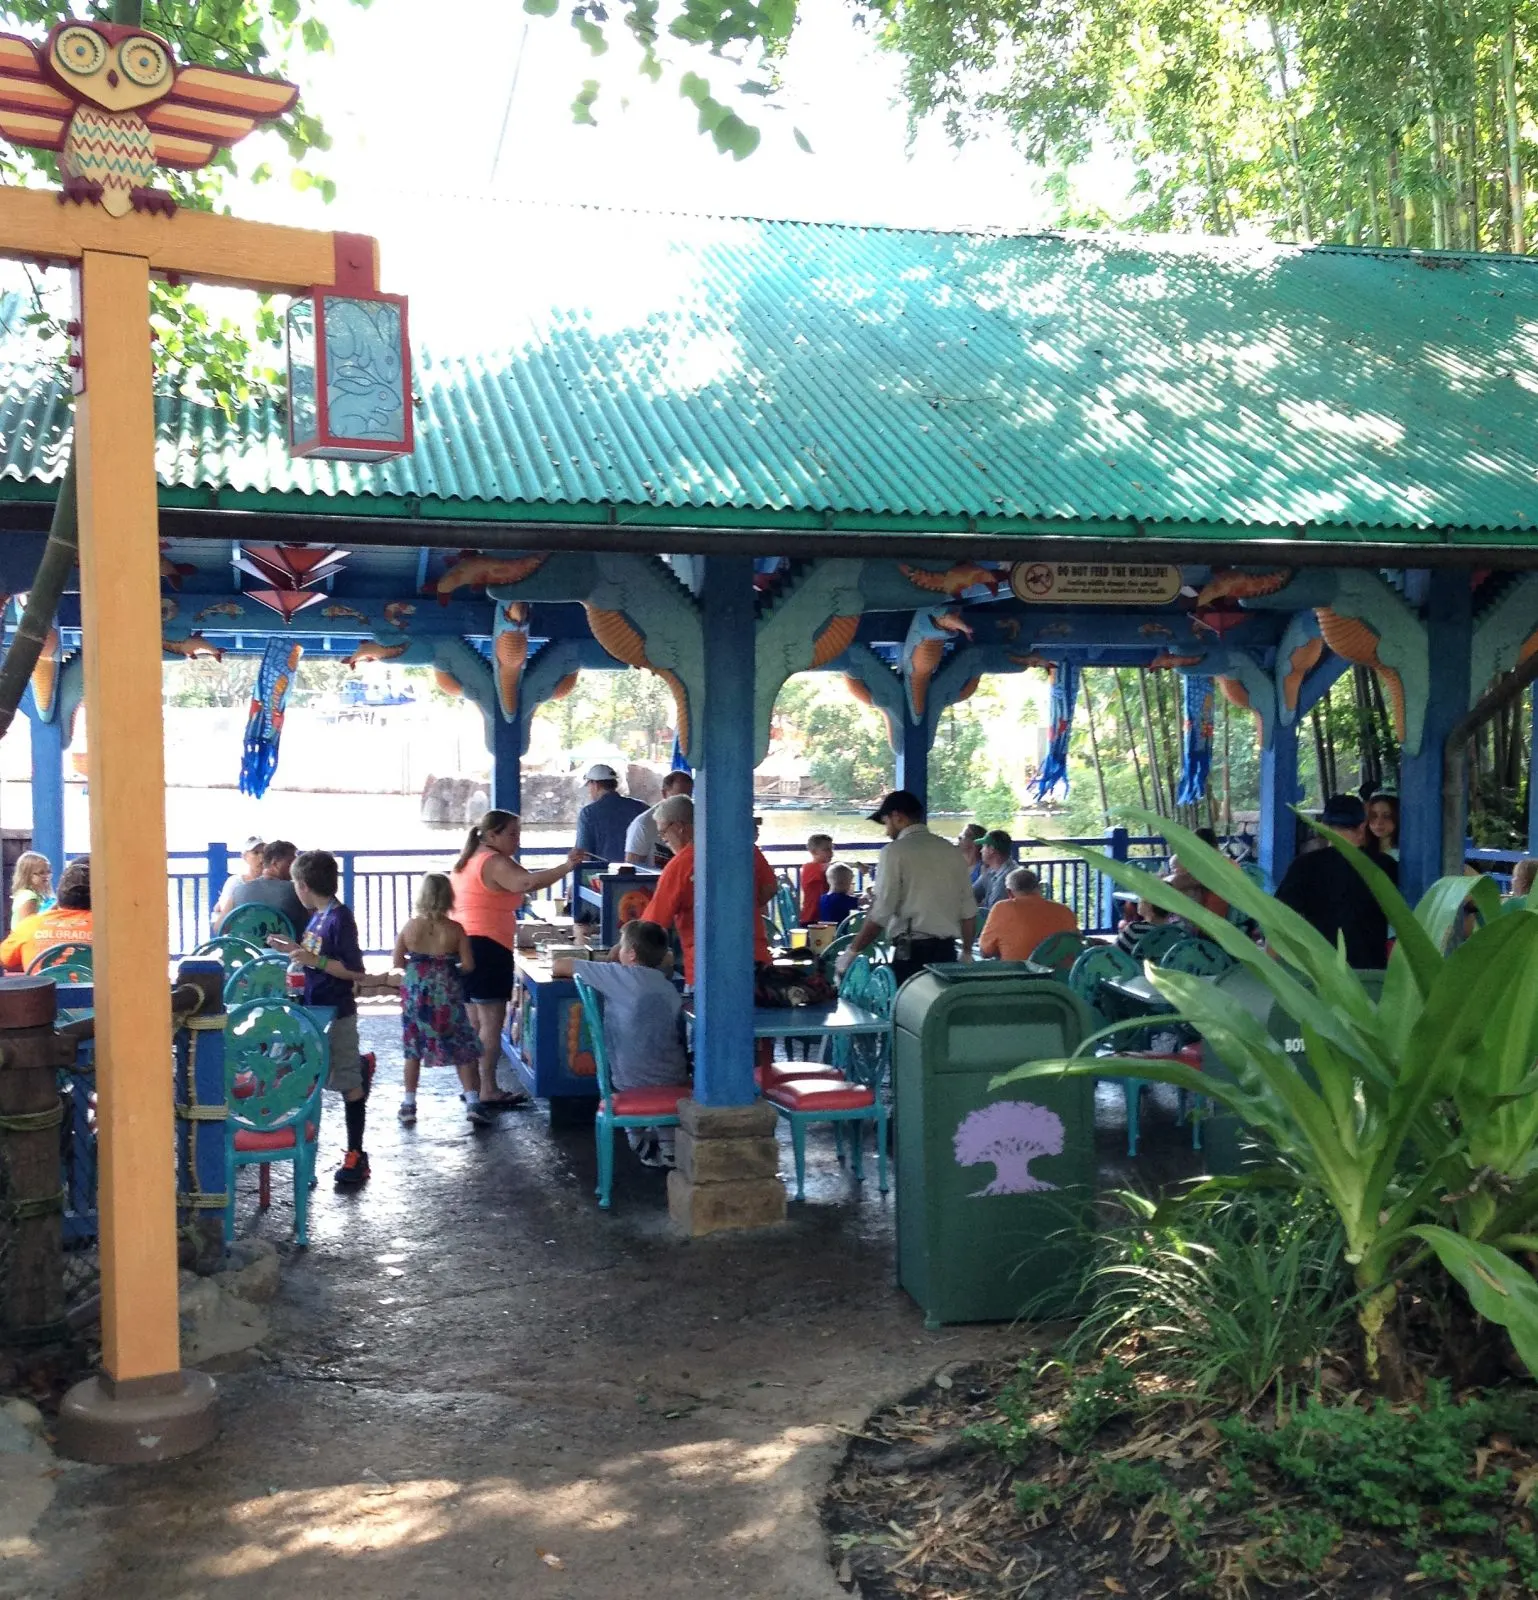 flame tree barbecue seating area - best animal kingdom quick service